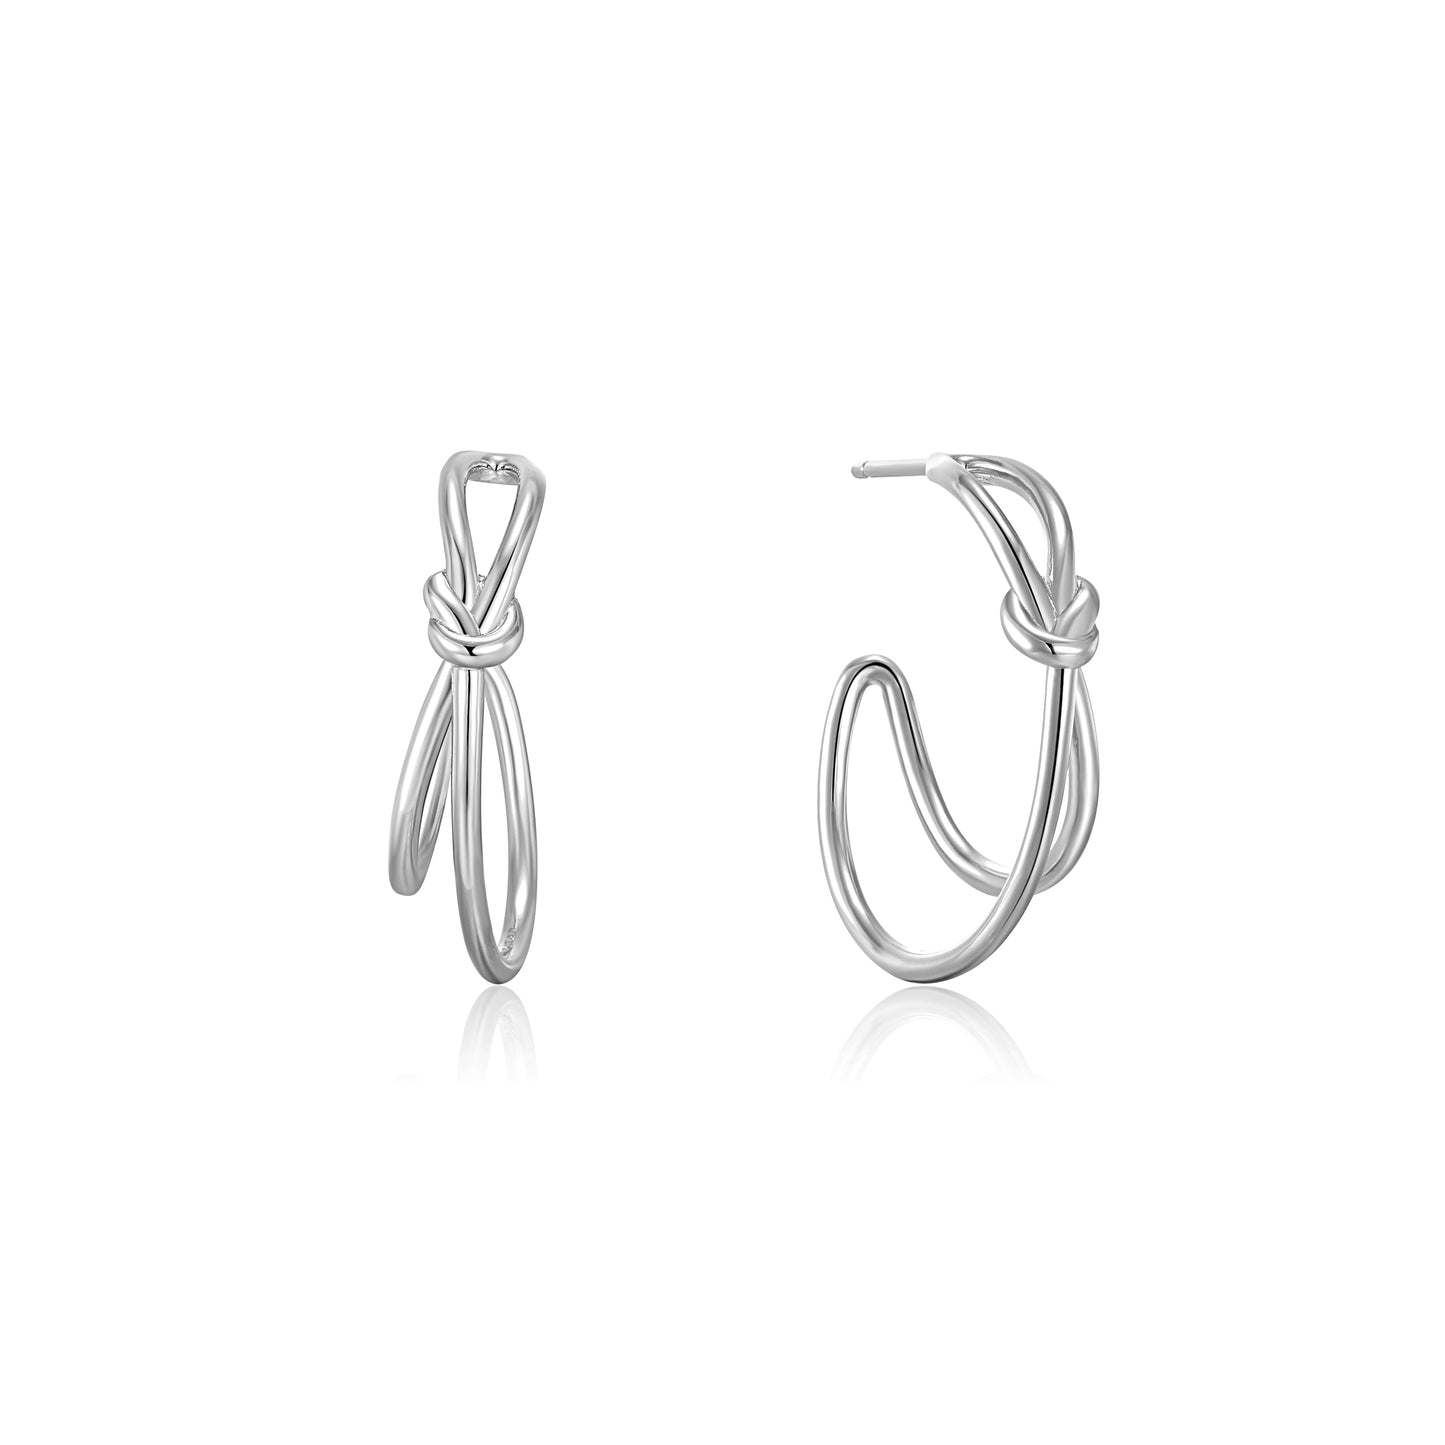 ANIA HAIE ANIA HAIE - Silver Knot Stud Hoop Earrings available at The Good Life Boutique